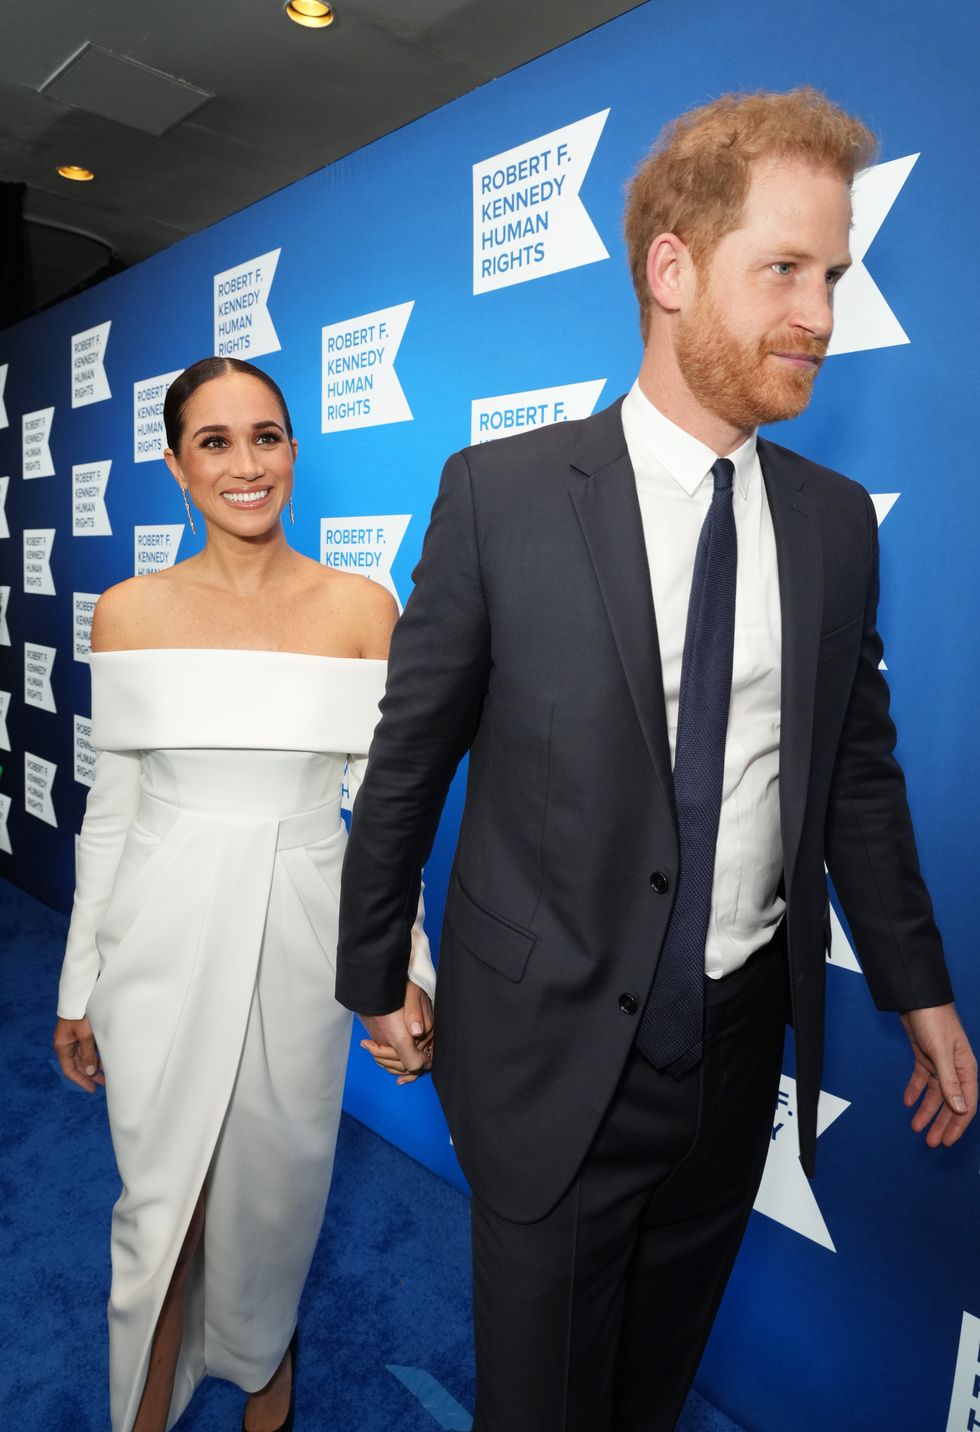 new york, new york   december 06  meghan, duchess of sussex and prince harry, duke of sussex attend the 2022 robert f kennedy human rights ripple of hope gala at new york hilton on december 06, 2022 in new york city photo by mike coppolagetty images for 2022 robert f kennedy human rights ripple of hope gala